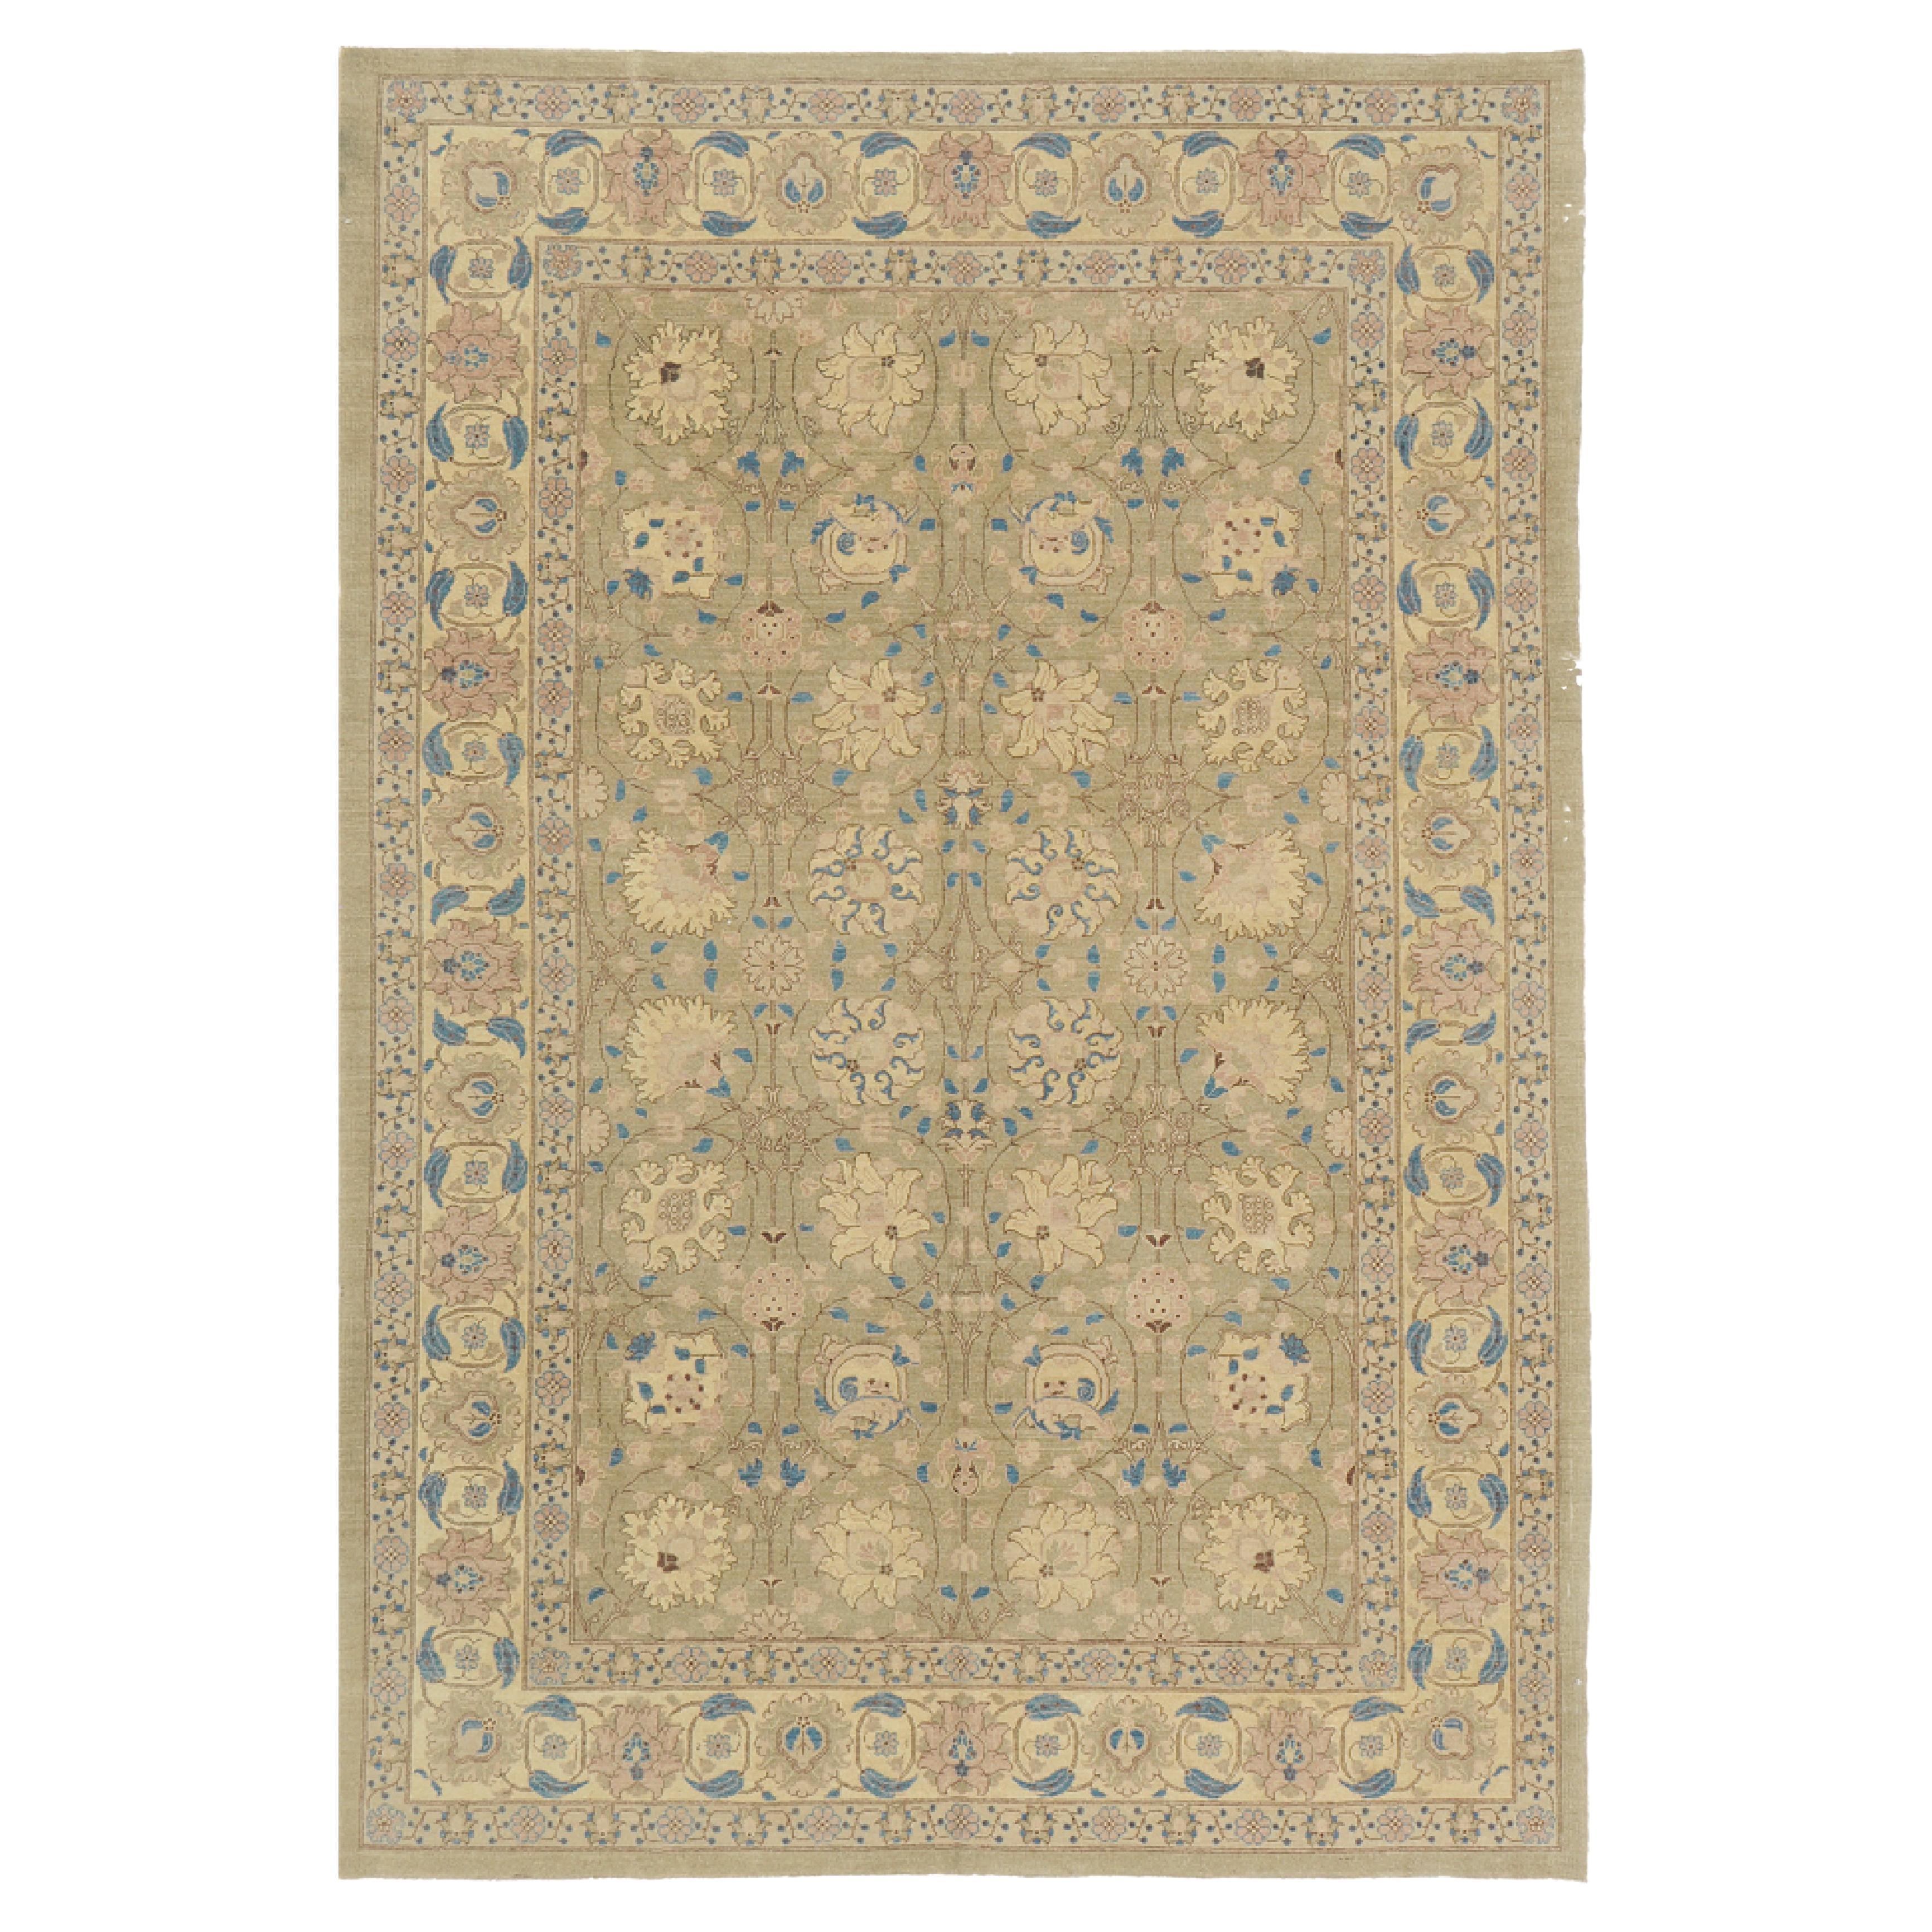 Natural Dye Classic Tabriz Design Rug, Fable Collection from Mehraban For Sale